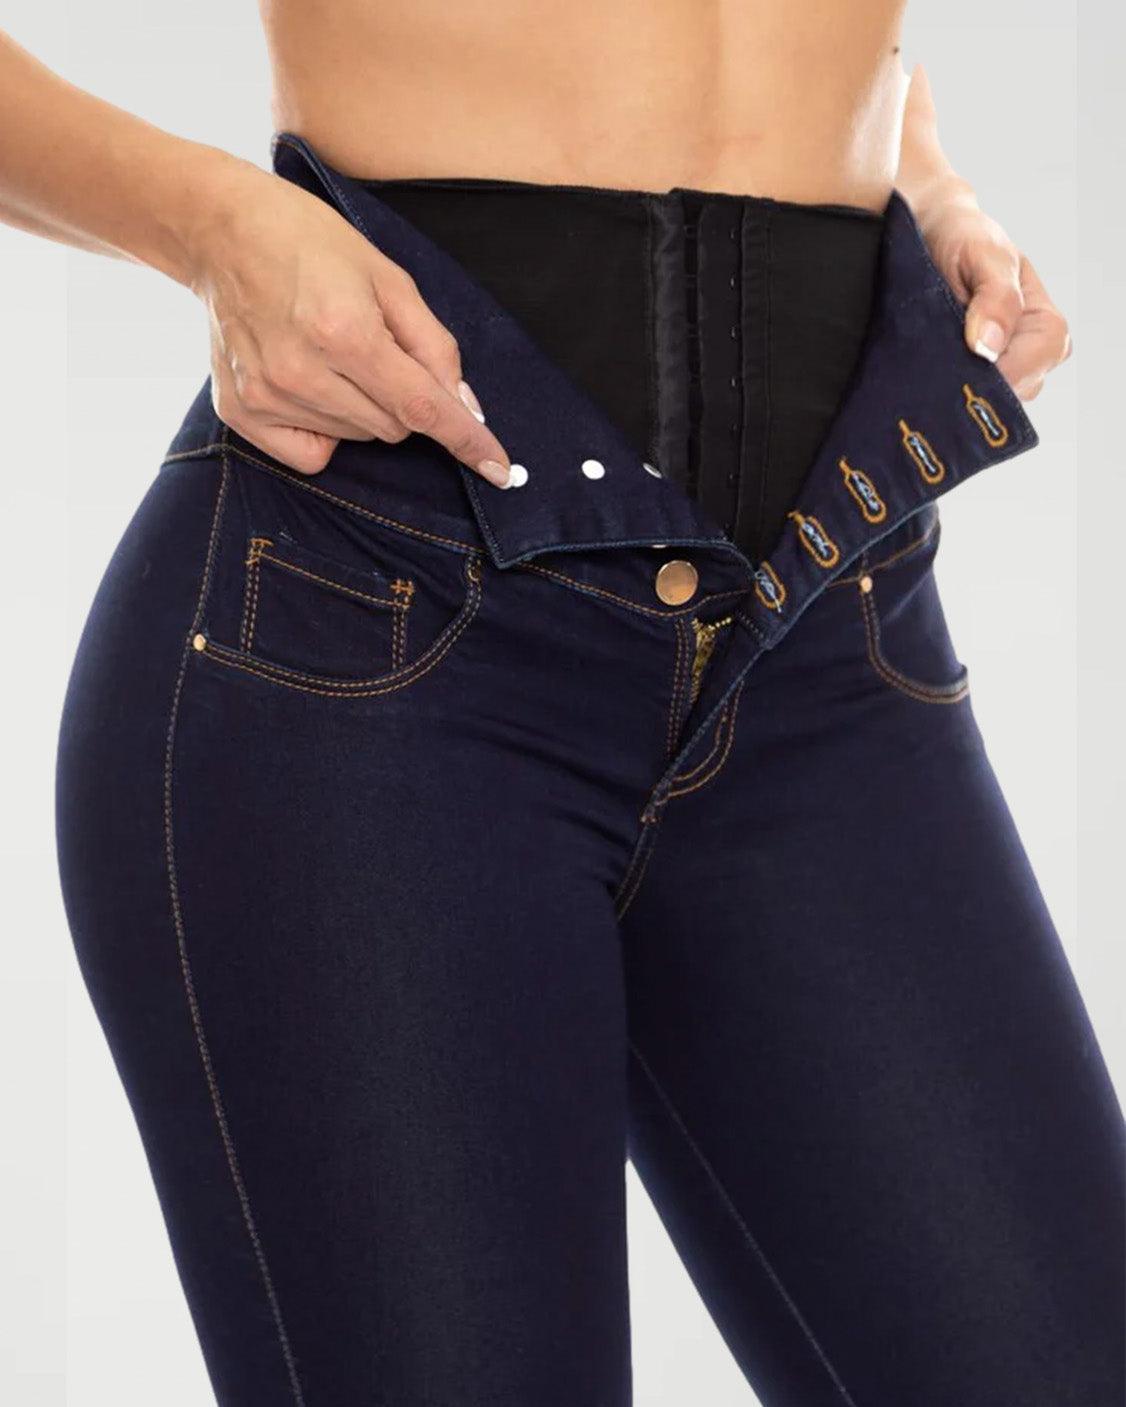 Colombian Butt Lift High Waist Jeans With Internal Girdle Ref 707977 - Wishe